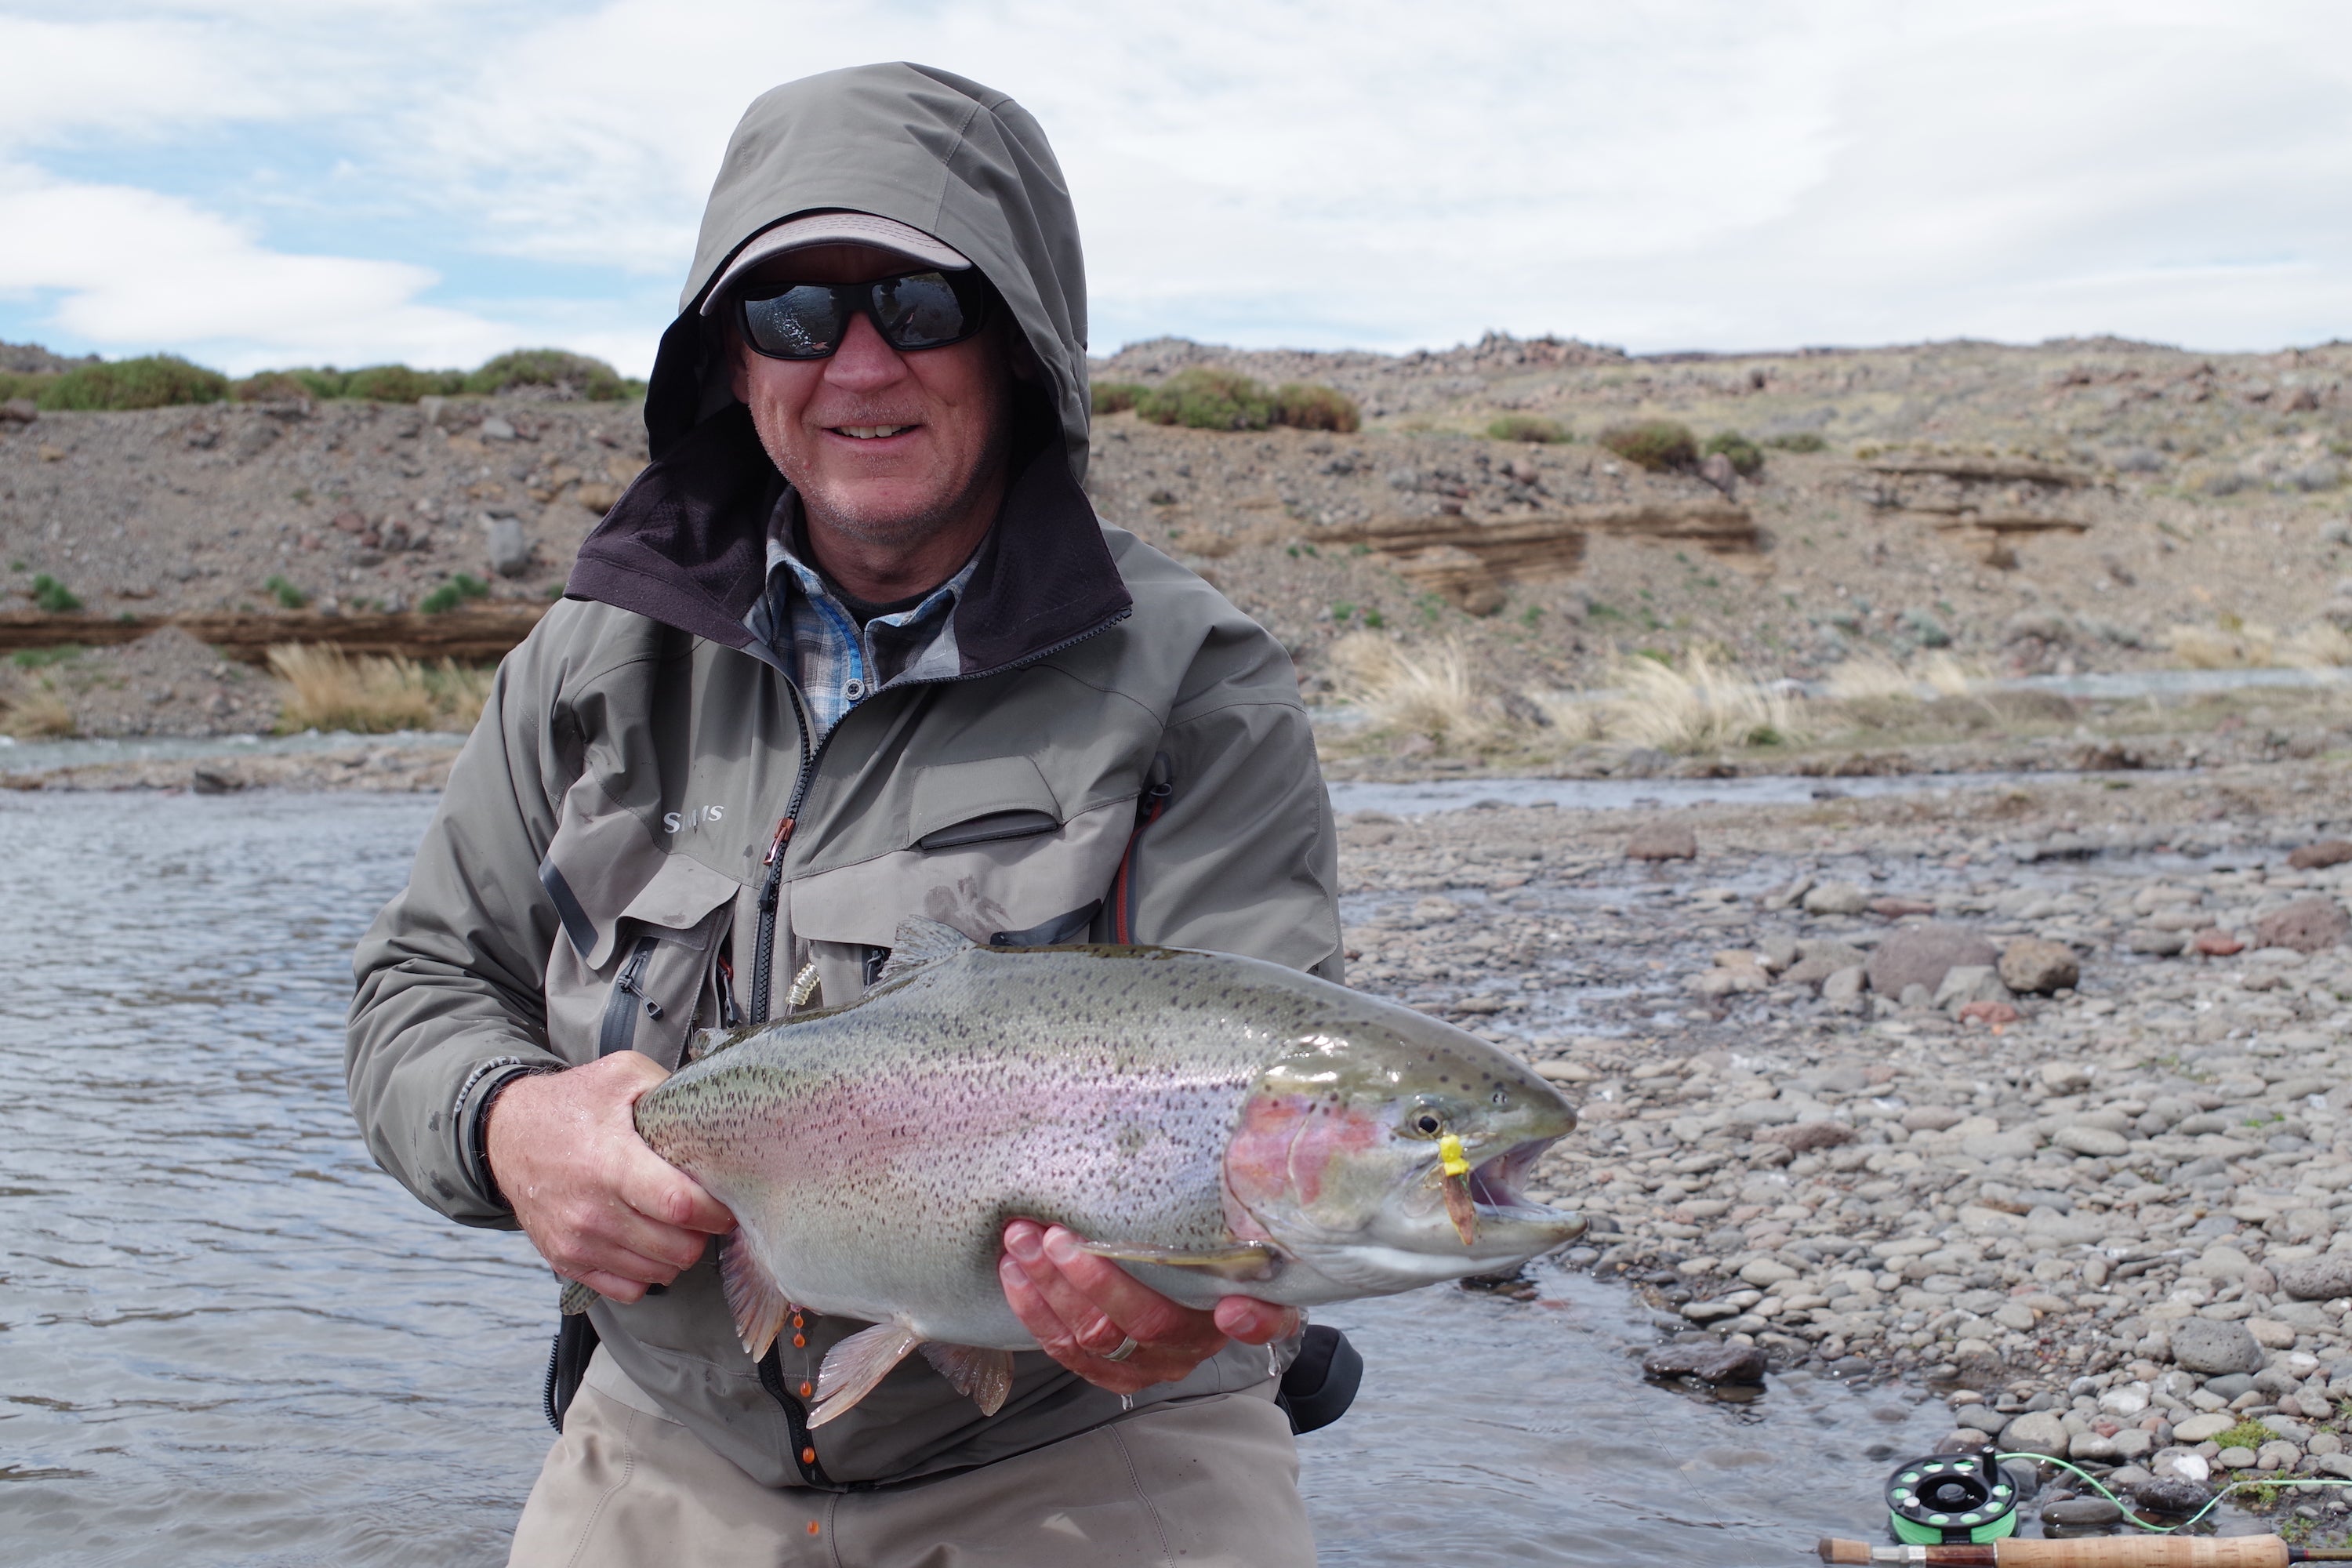 Jurassic Lake Giant Rainbow Trout Video - Anglers Journal - A Fishing Life